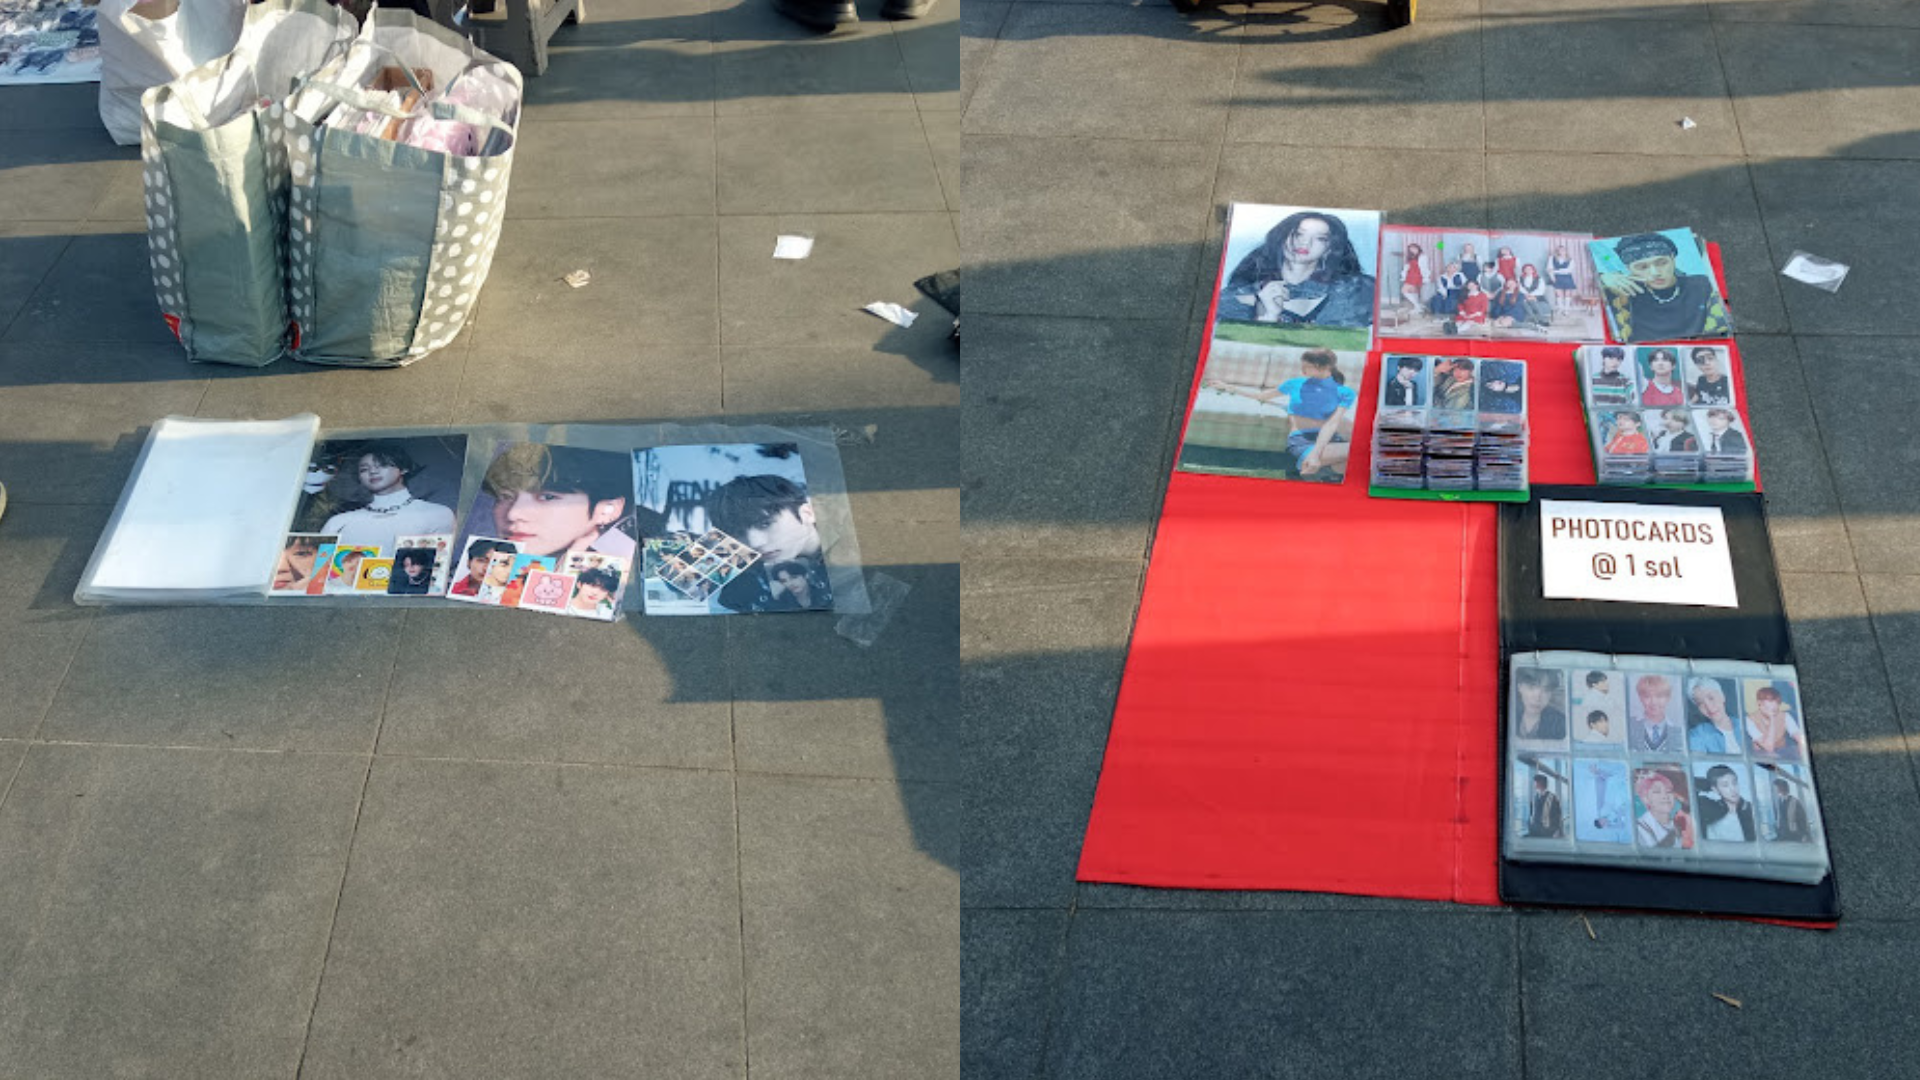 K-pop fans gather at Alameda 28 de Julio to present their products.